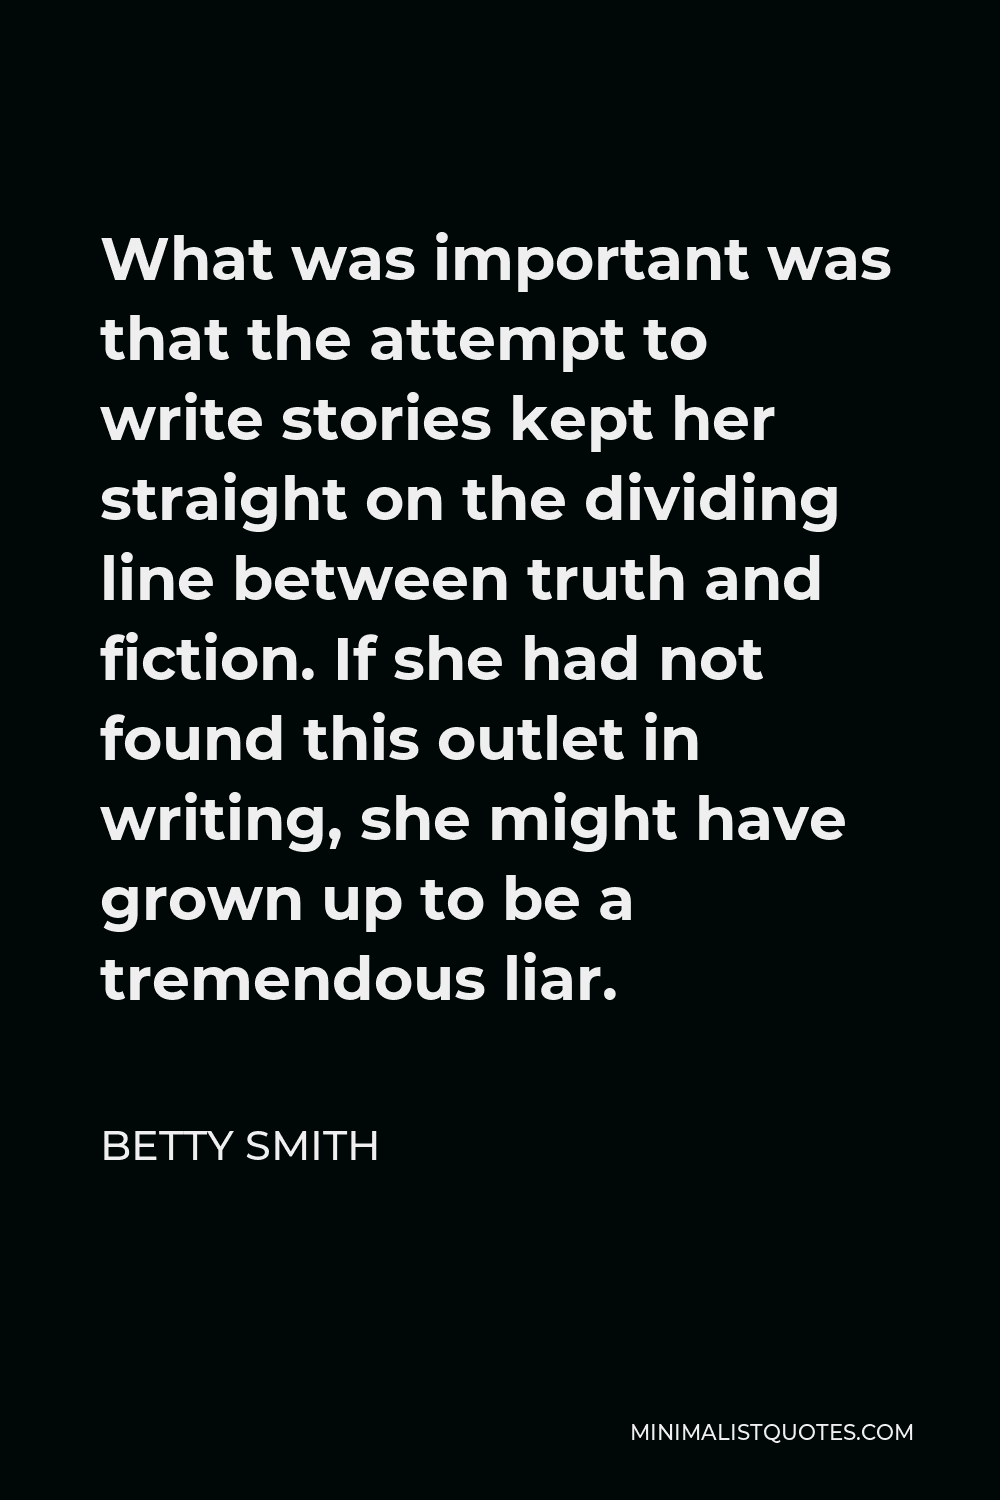 Betty Smith Quote - What was important was that the attempt to write stories kept her straight on the dividing line between truth and fiction. If she had not found this outlet in writing, she might have grown up to be a tremendous liar.